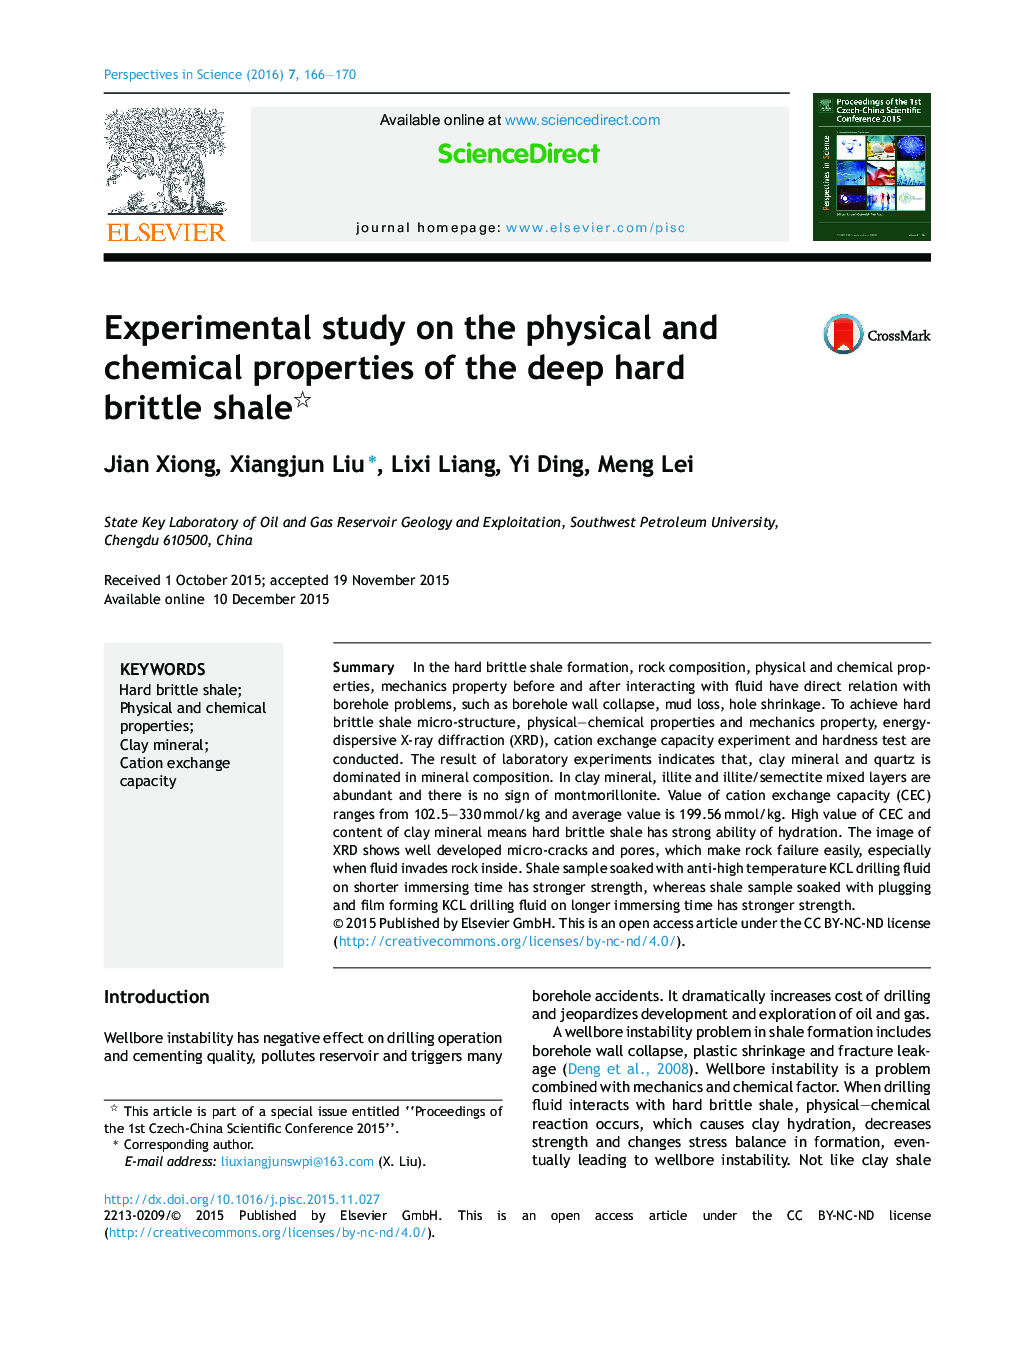 Experimental study on the physical and chemical properties of the deep hard brittle shale 